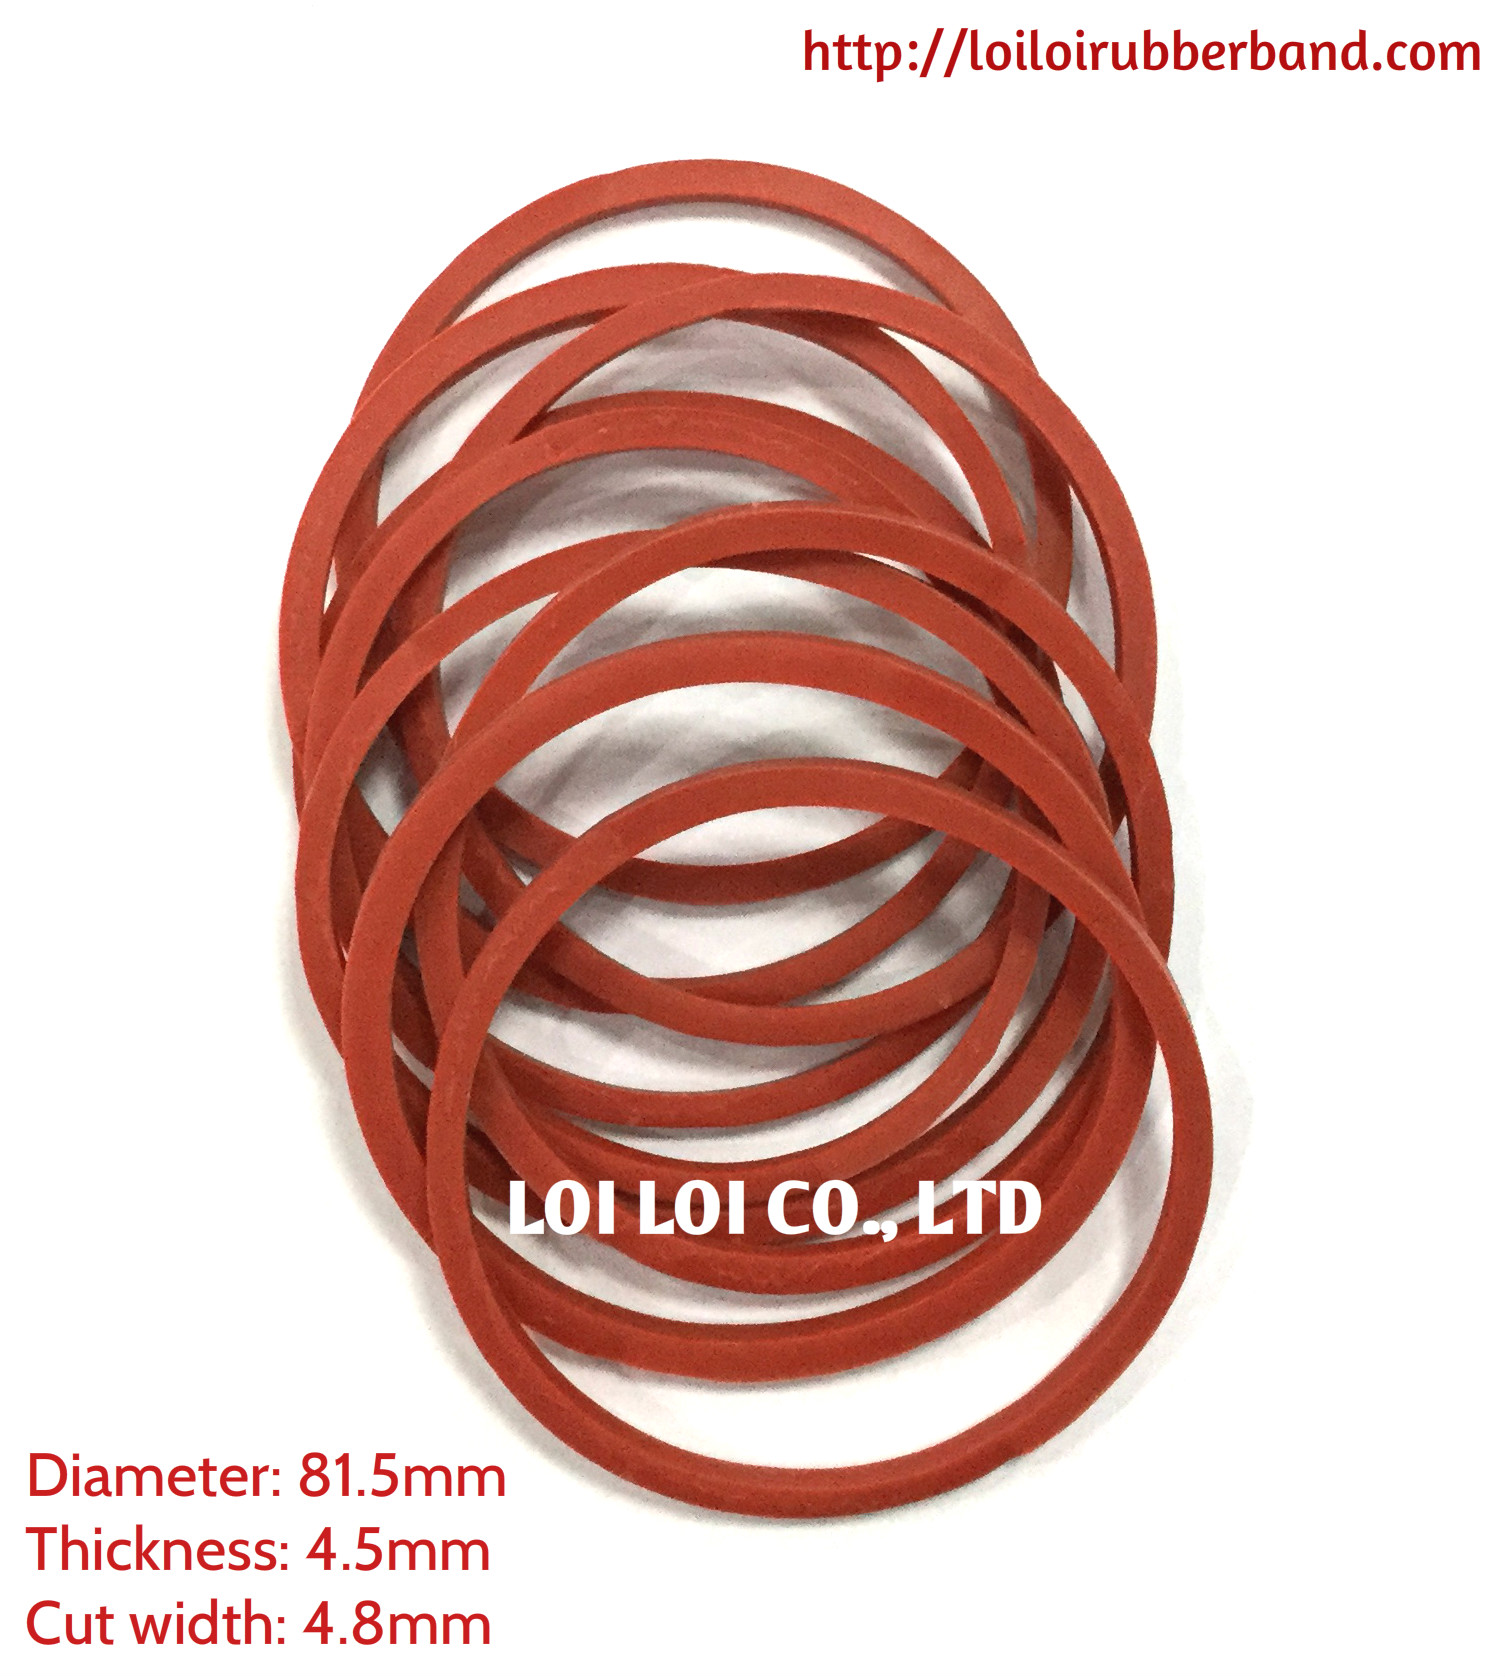 Thick Red Industrial Rubber Band - Rubber Band Manufacturer Wholesale